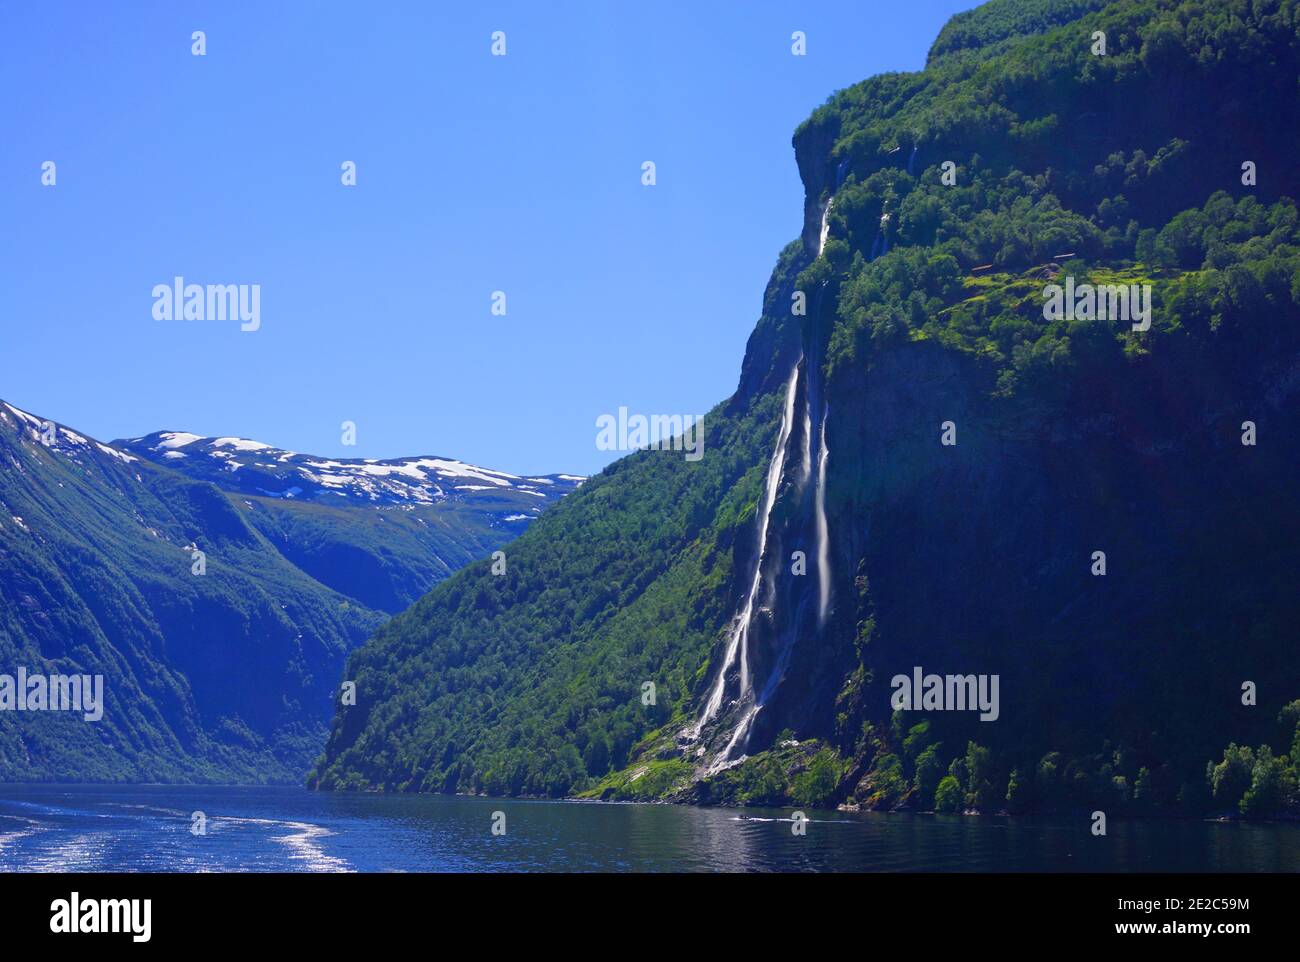 The 400 meter high Seven Sisters waterfall in Geiranger, Norway. Stock Photo